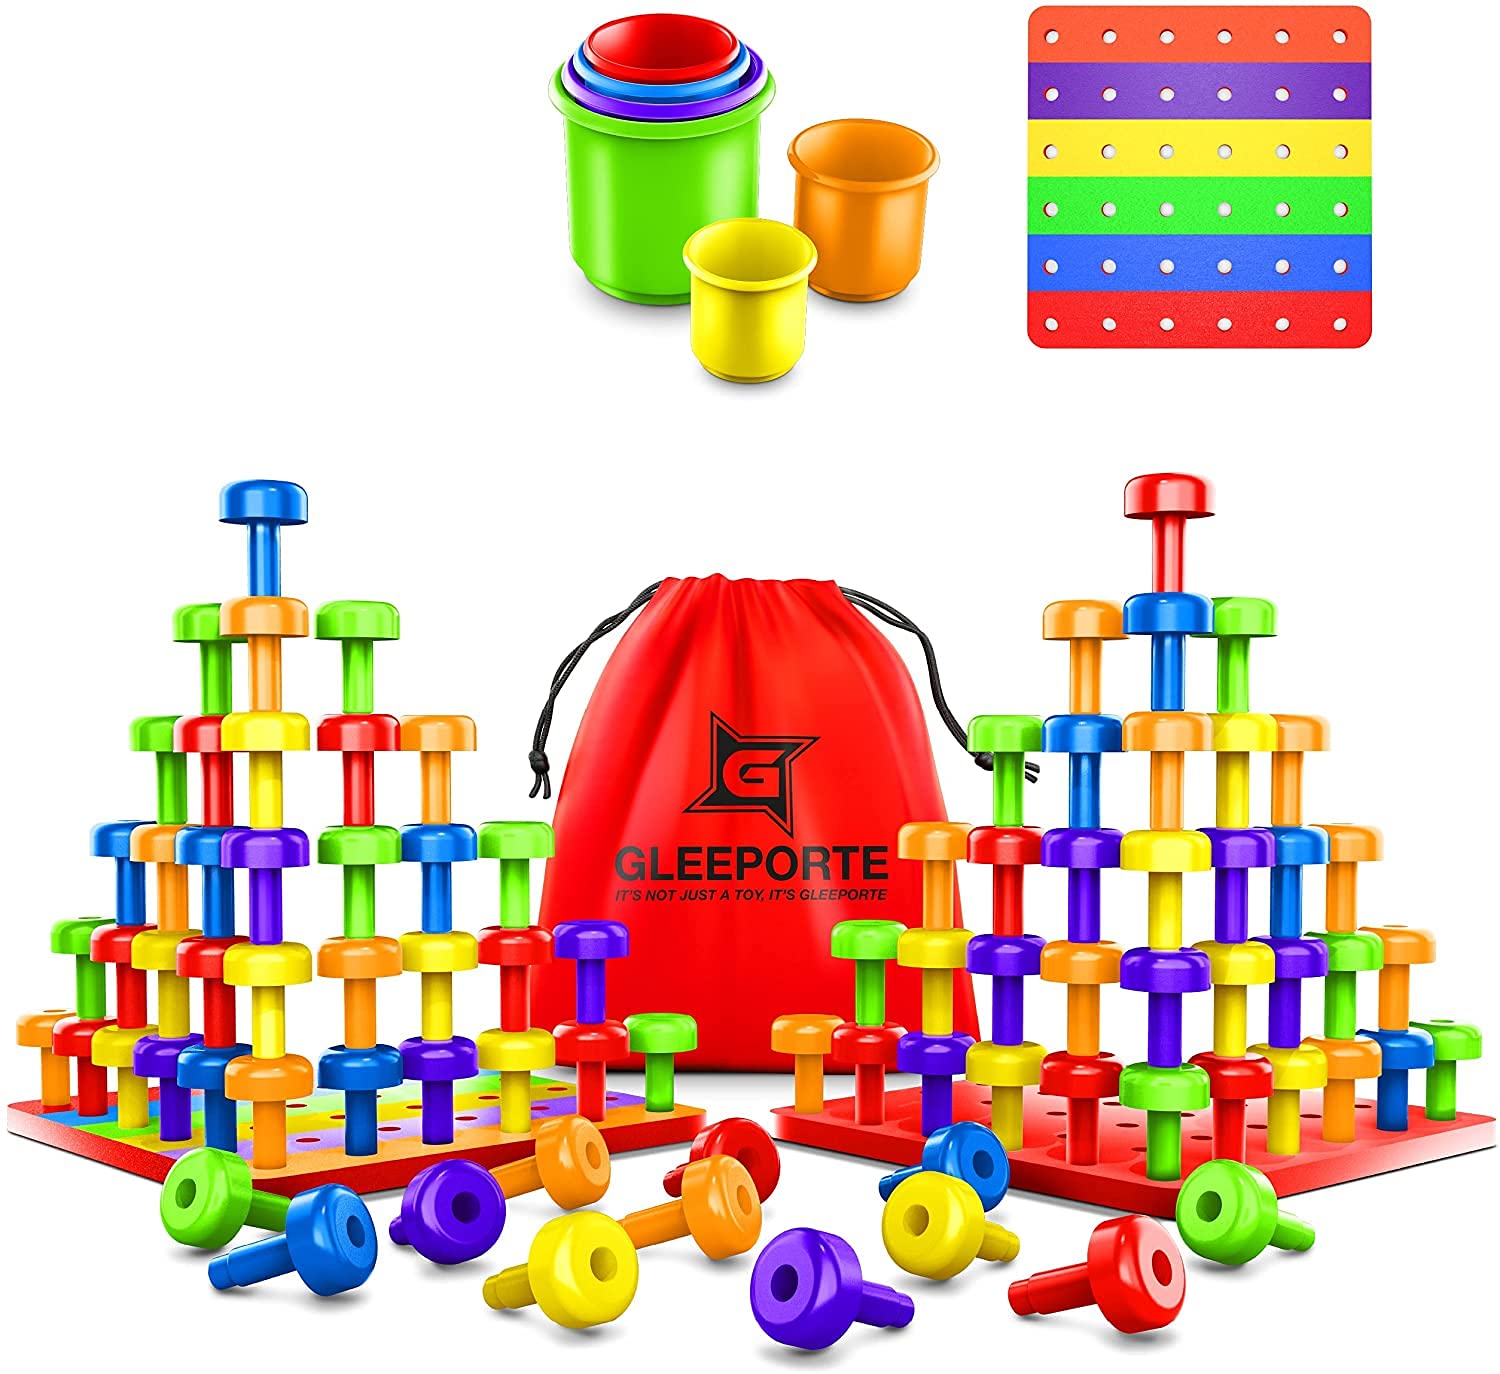 Stacking Peg Board Set Toy | JUMBO PACK | 60 Pegs & Board + FREE Stacking Cups + FREE Colorful Board + FREE Storage Bag | STEM Color Learning Montessori Occupational Therapy Fine Motor Skills Toddlers